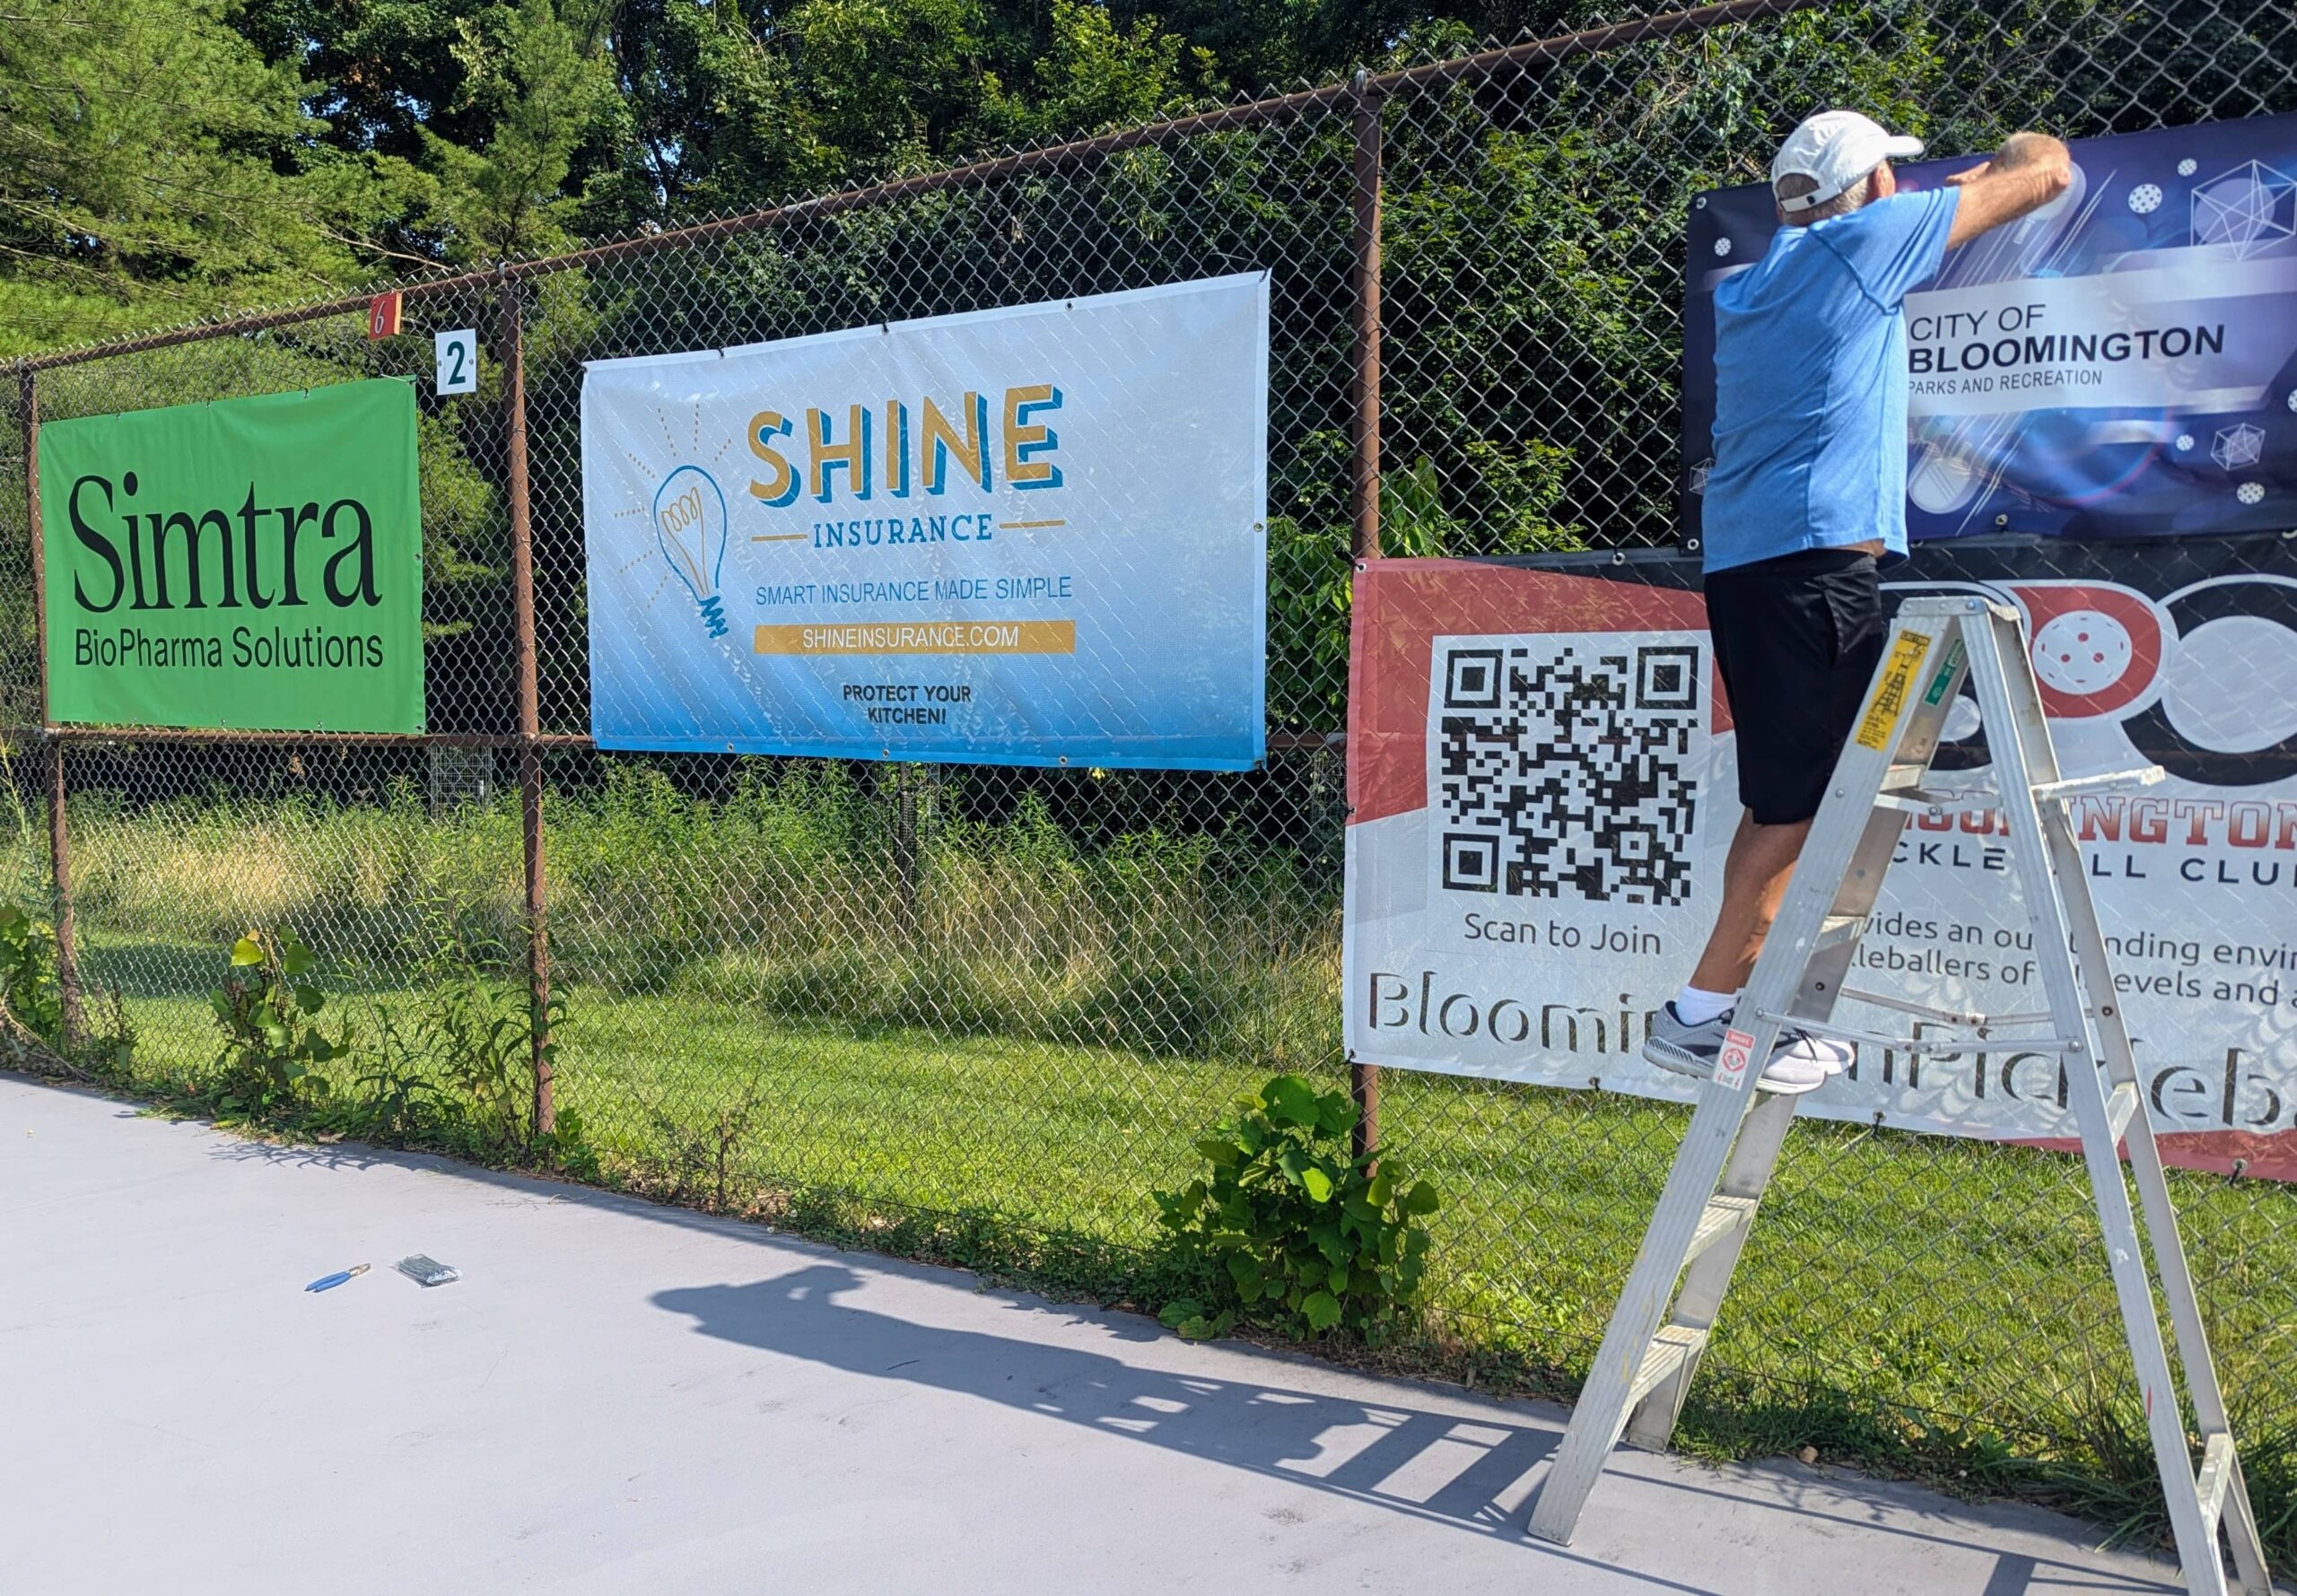 Steve Jackson standing on a ladder hanging sponsor banners for the Bloomington Pickleball Club on a chain-link fence. The banners include advertisements for Simtra BioPharma Solutions, Shine Insurance, and the City of Bloomington Parks and Recreation.